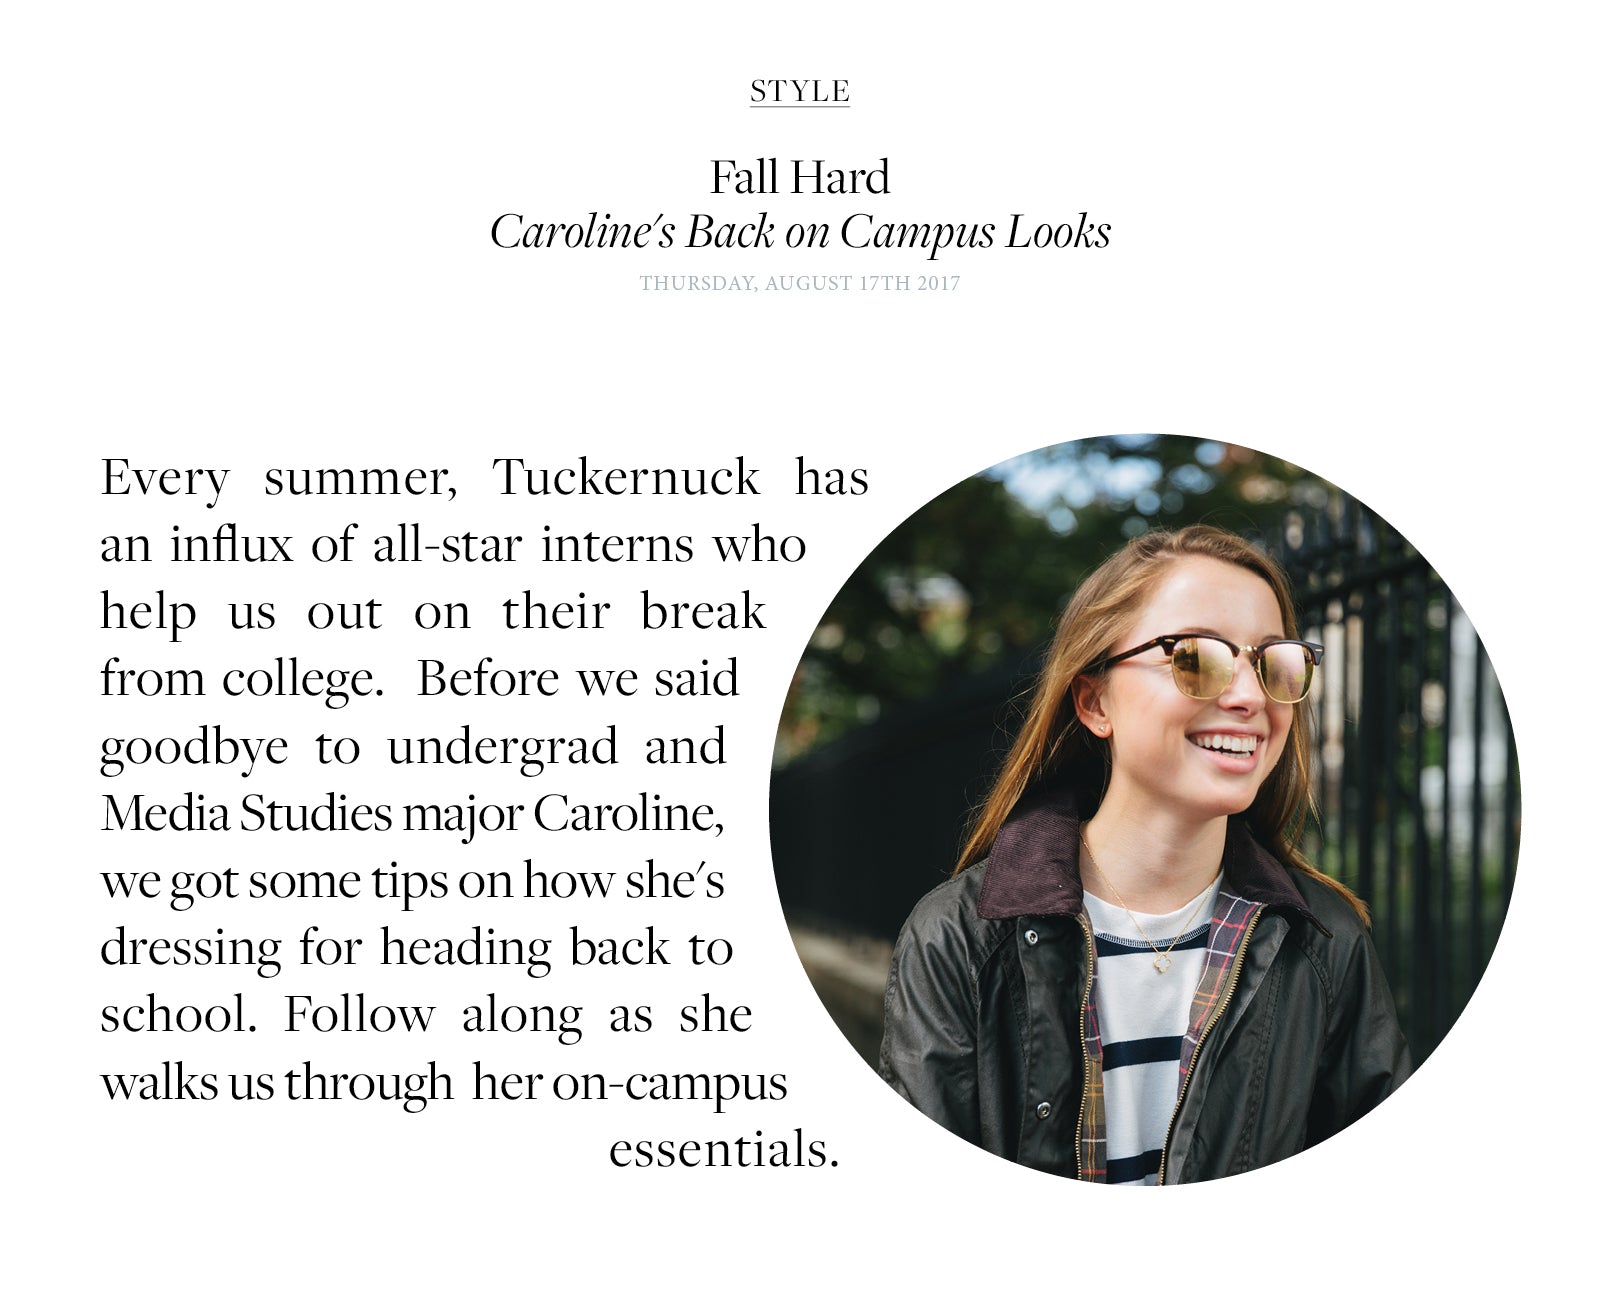 Every summer, Tuckernuck has an influx of all-star interns who help us out on their break from college.  Before we said goodbye to undergrad and Media Studies major Caroline,  we got some tips on how she's dressing for heading back to school. Follow along as she walks us through  her on-campus  essentials.